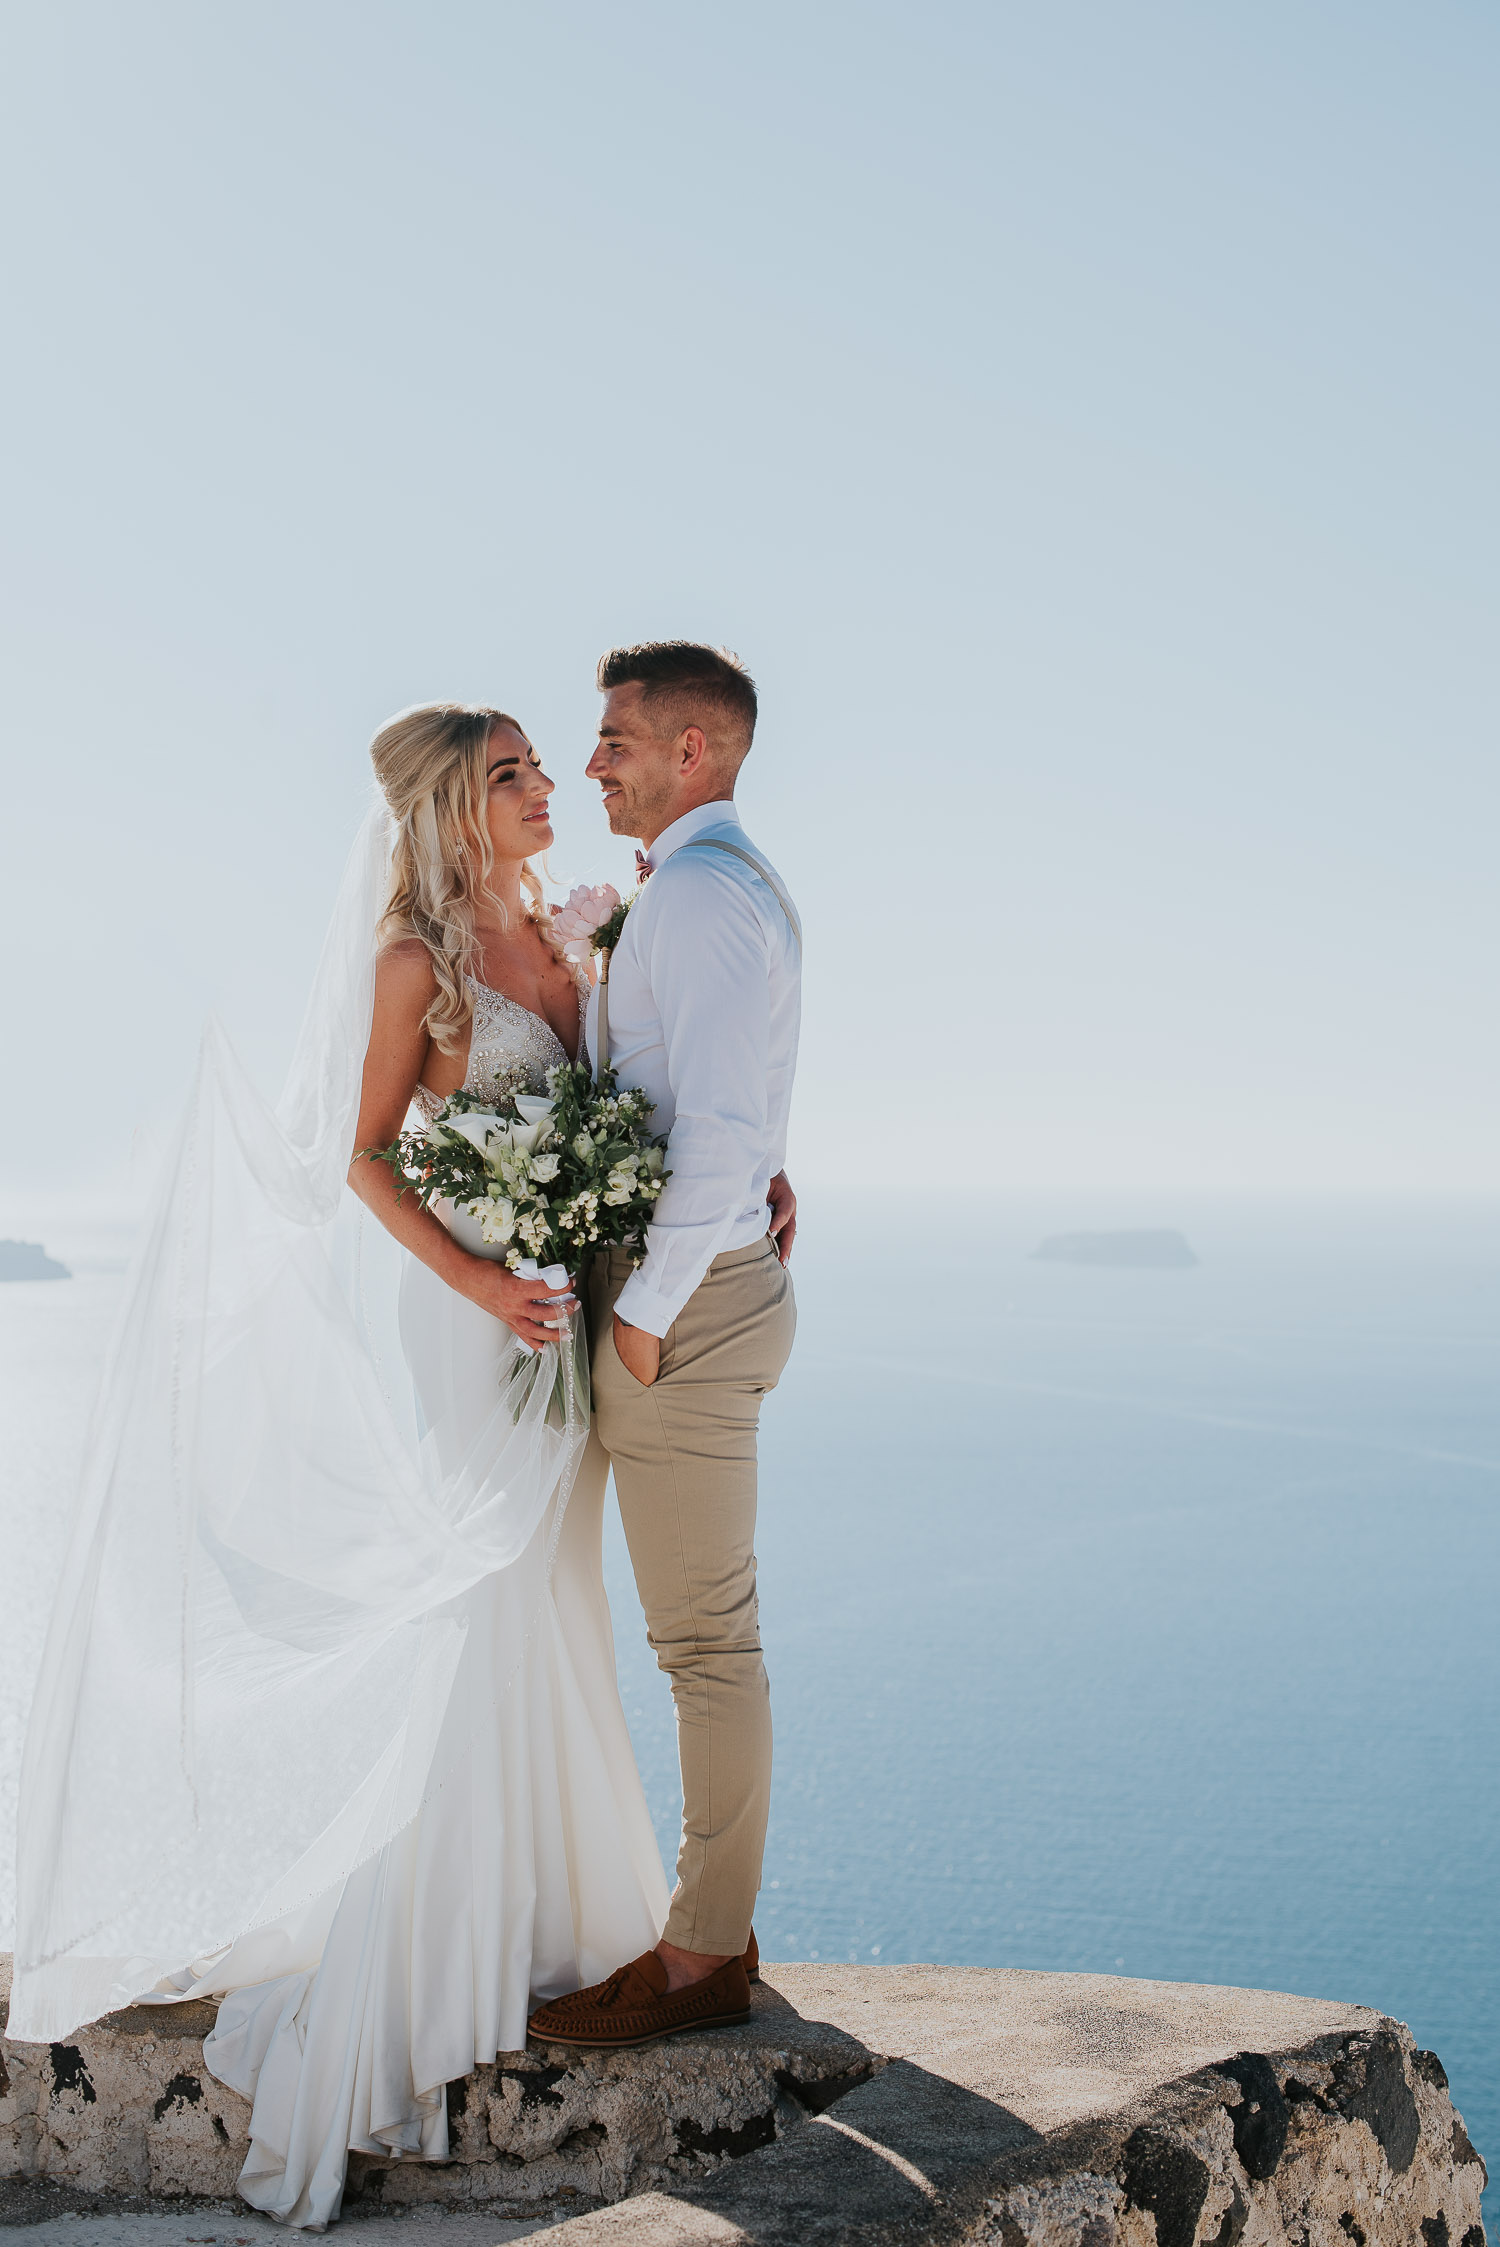 Wedding photographer Santorini: close up of bride and groom surrounded by the sea and the sky by Ben and Vesna.